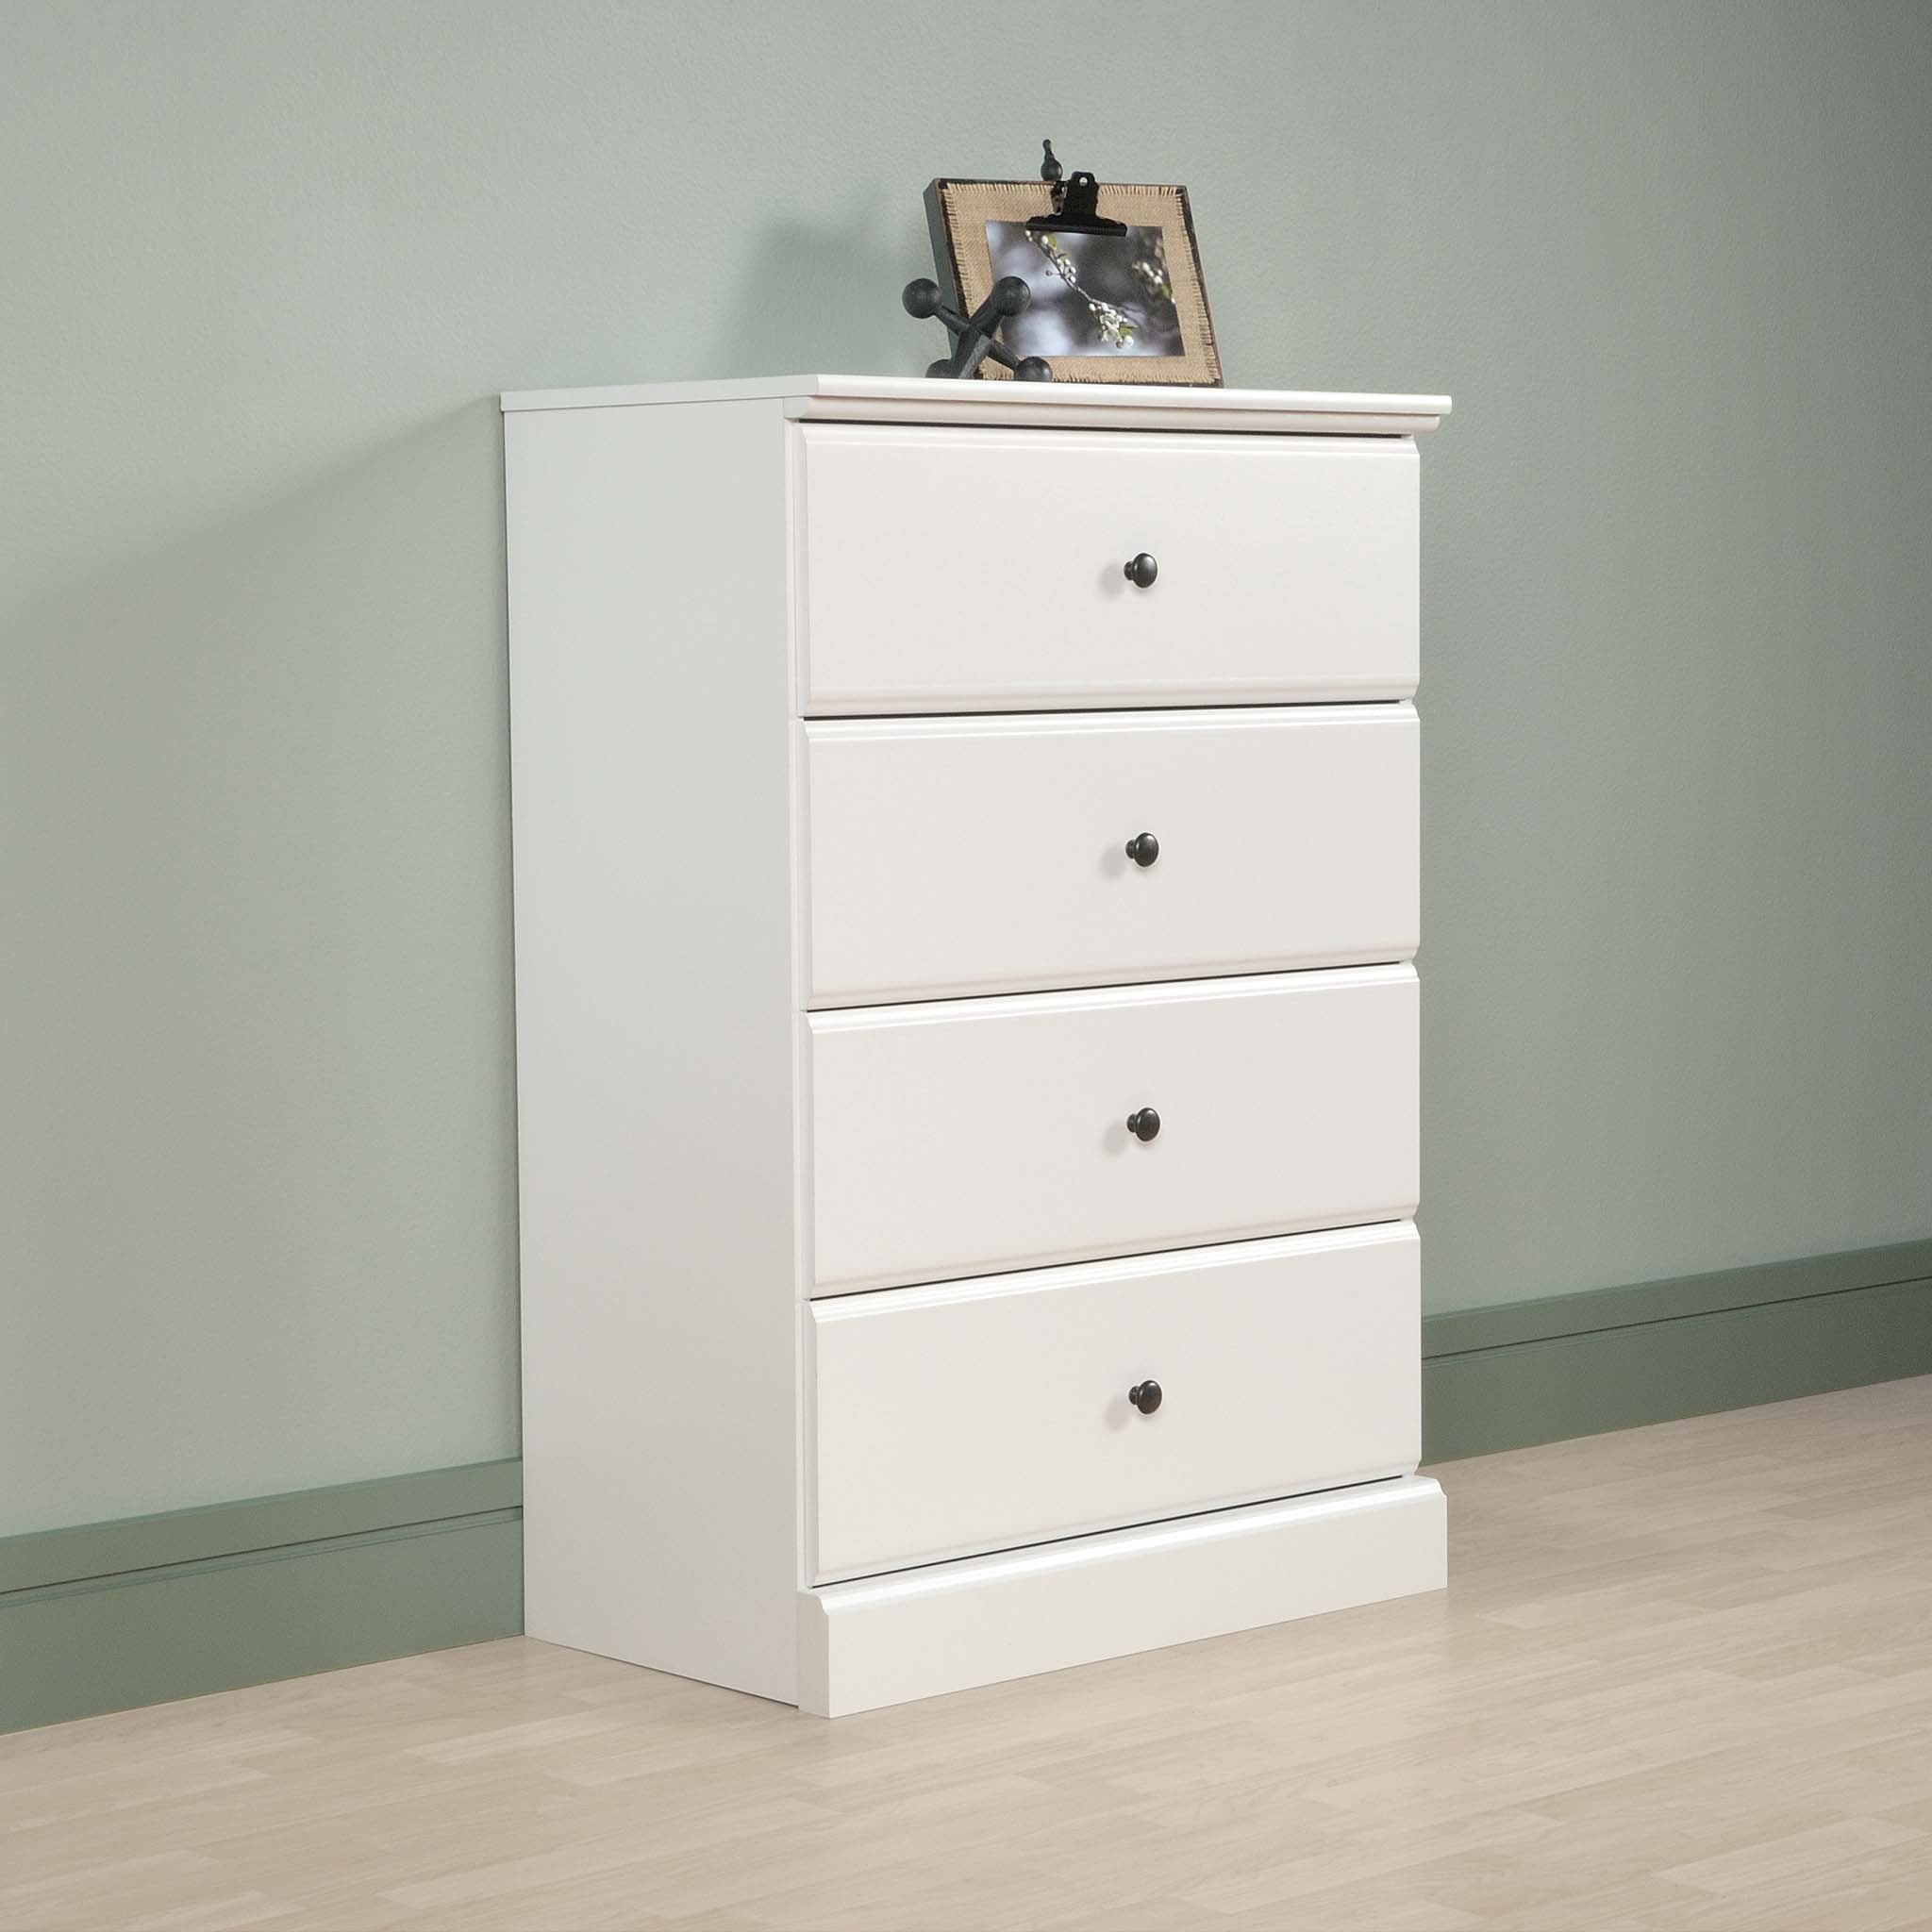 Chest Of Drawers Large White Home Bedroom Dresser 4 Four Drawer